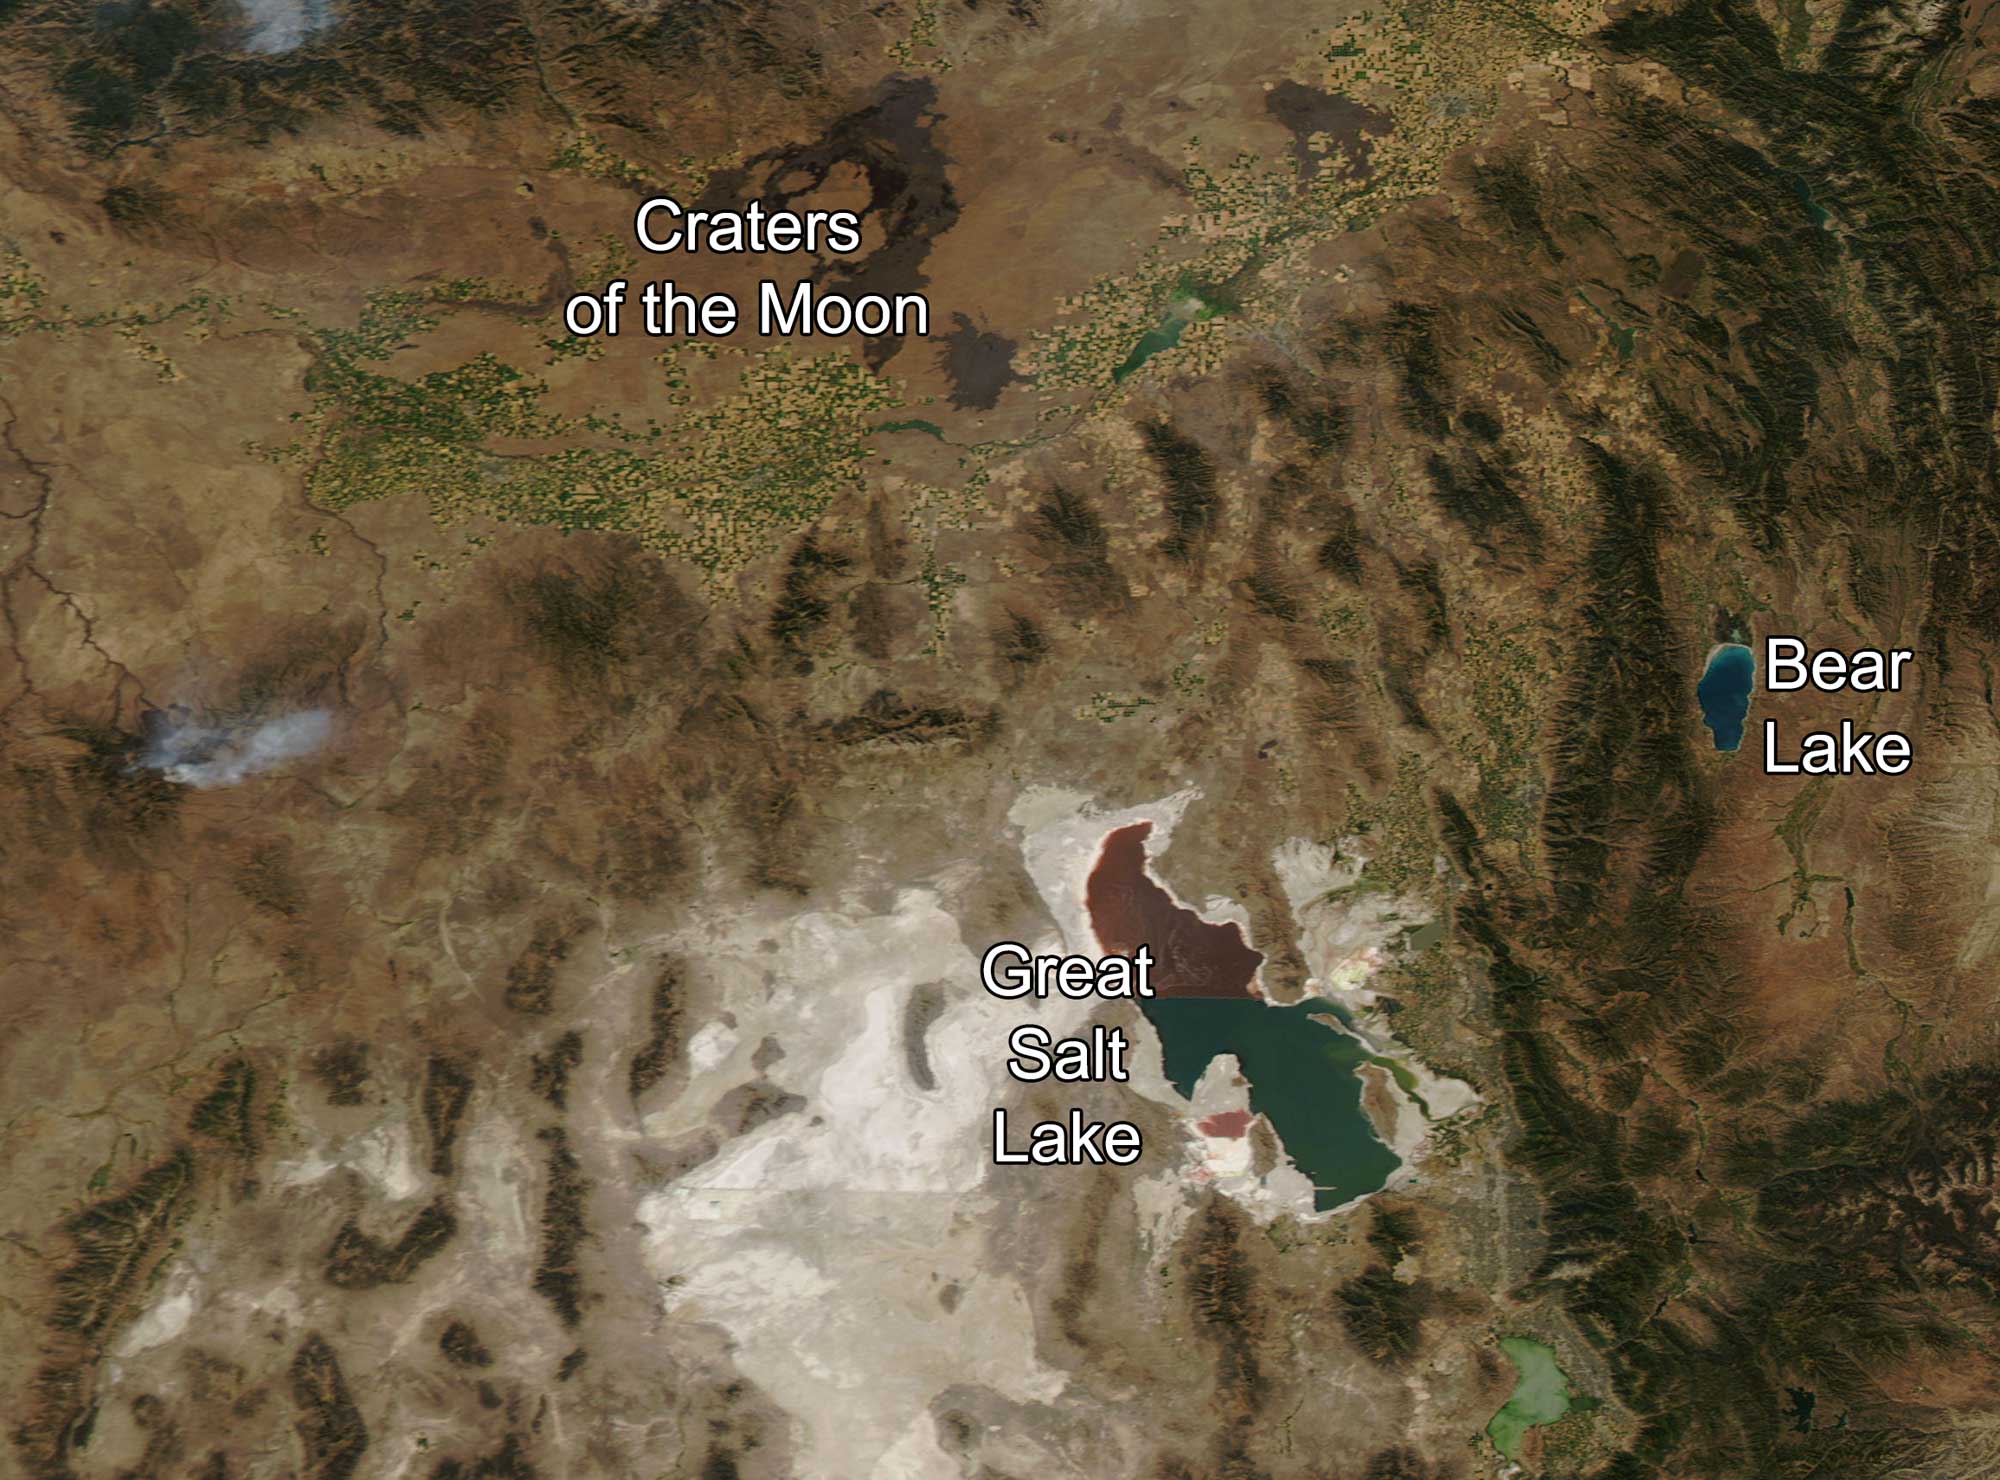 Satellite photograph of the Basin and Range region on the Idaho-Utah border. The photo shows the Great Salt Lake (bottom, center-right), Craters of the Moon (top, center left), and Bear Lake (right) as well as the roughly parallel ranges making up the basin and range province.